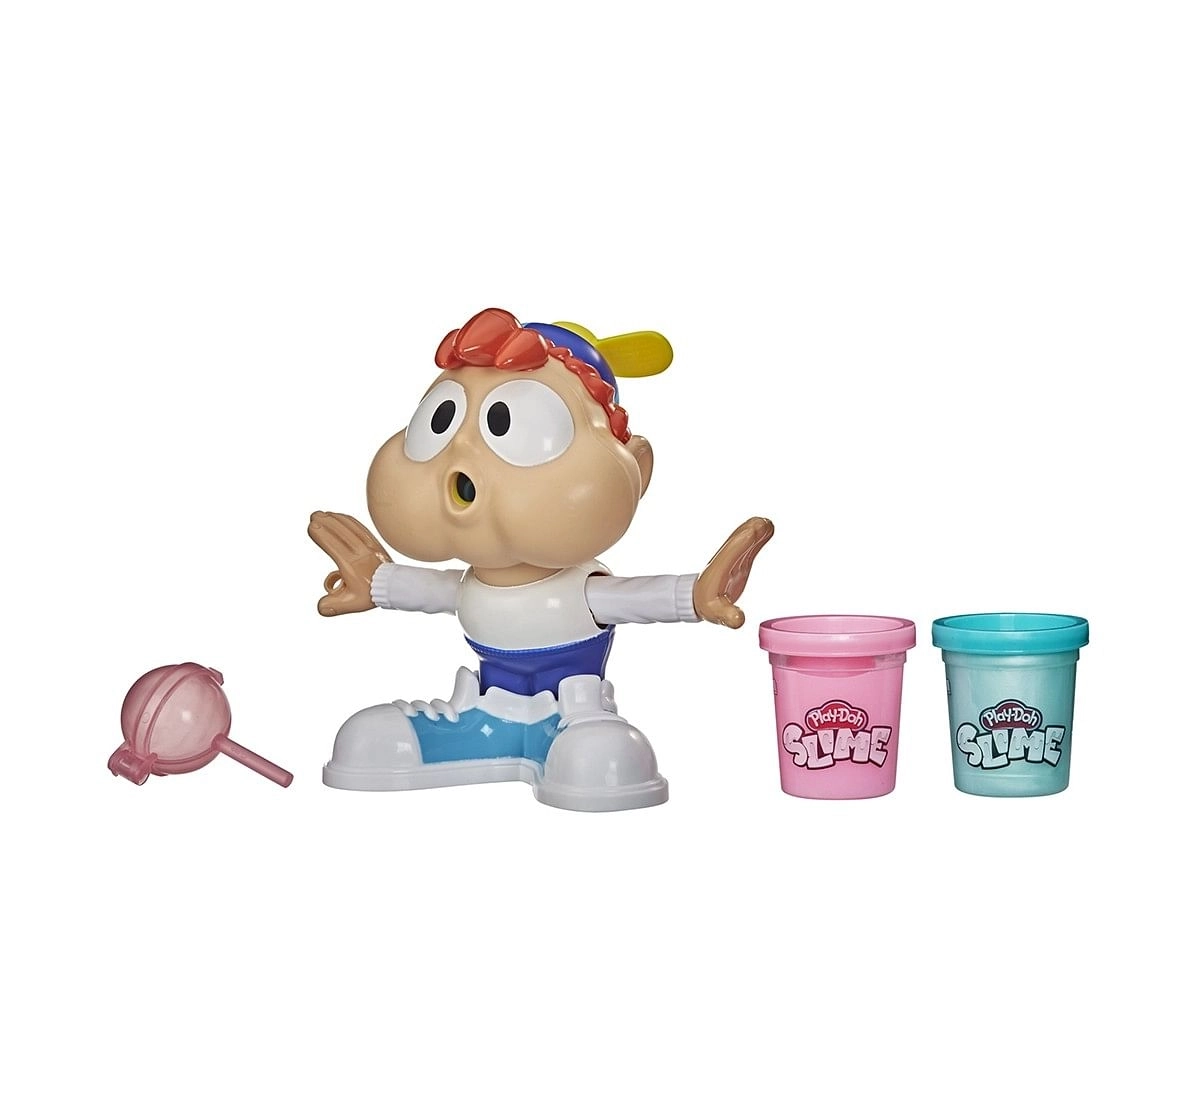 Play-Doh Slime Chewin' Charlie Slime Bubble Maker Toy for Kids 3 Years and Up with 2 Cans of Pink and Blue Play-Doh Slime Compound, Non-Toxic  Clay & Dough for Kids age 3Y+ 